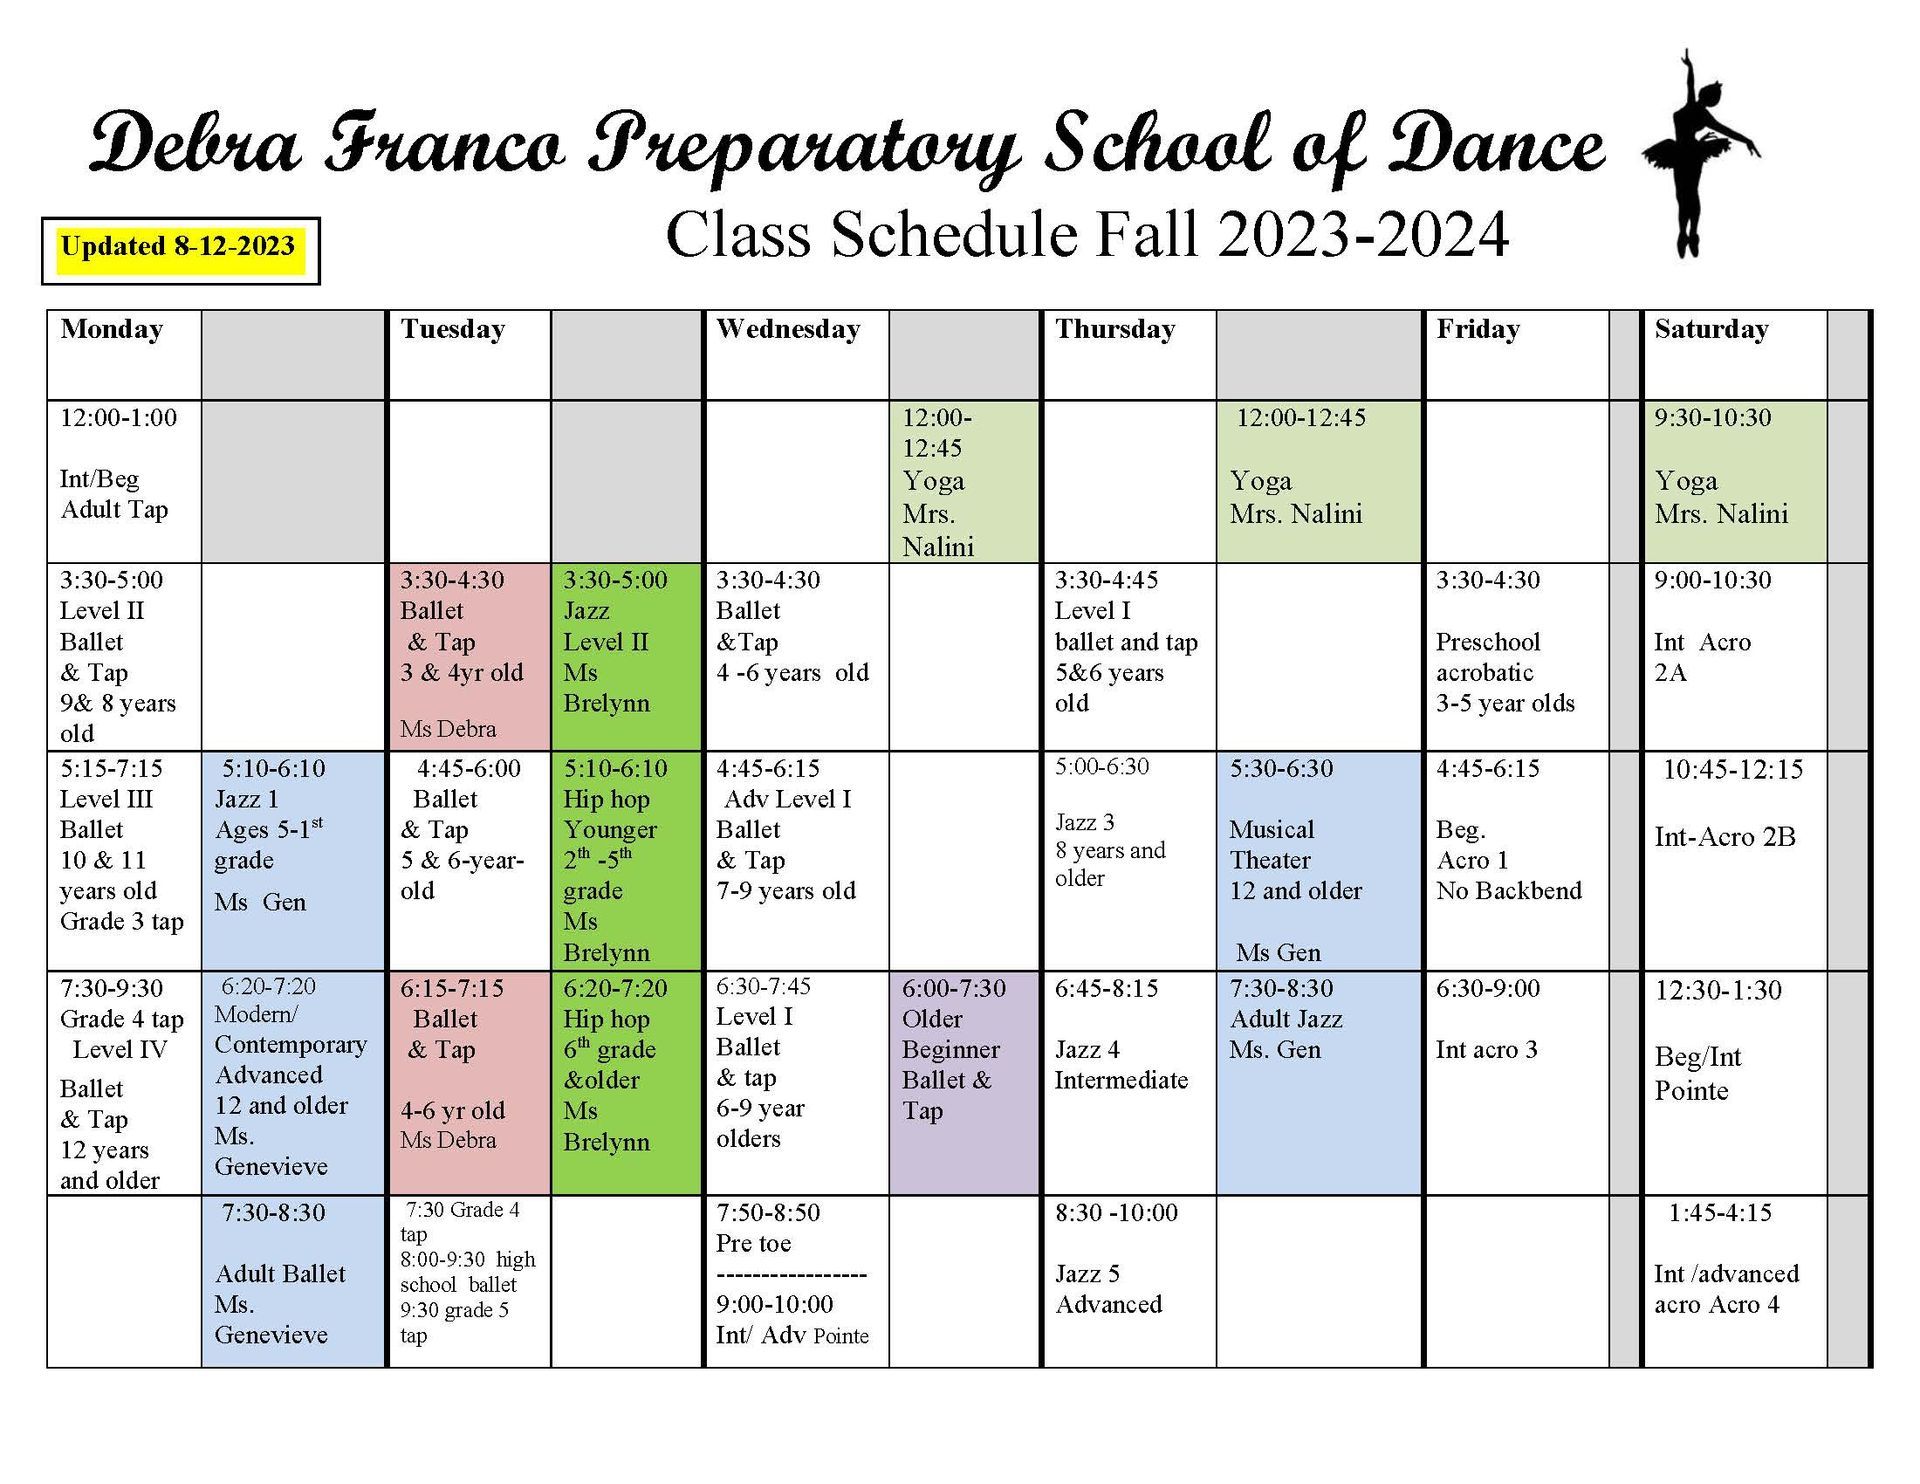 class schedule for fall